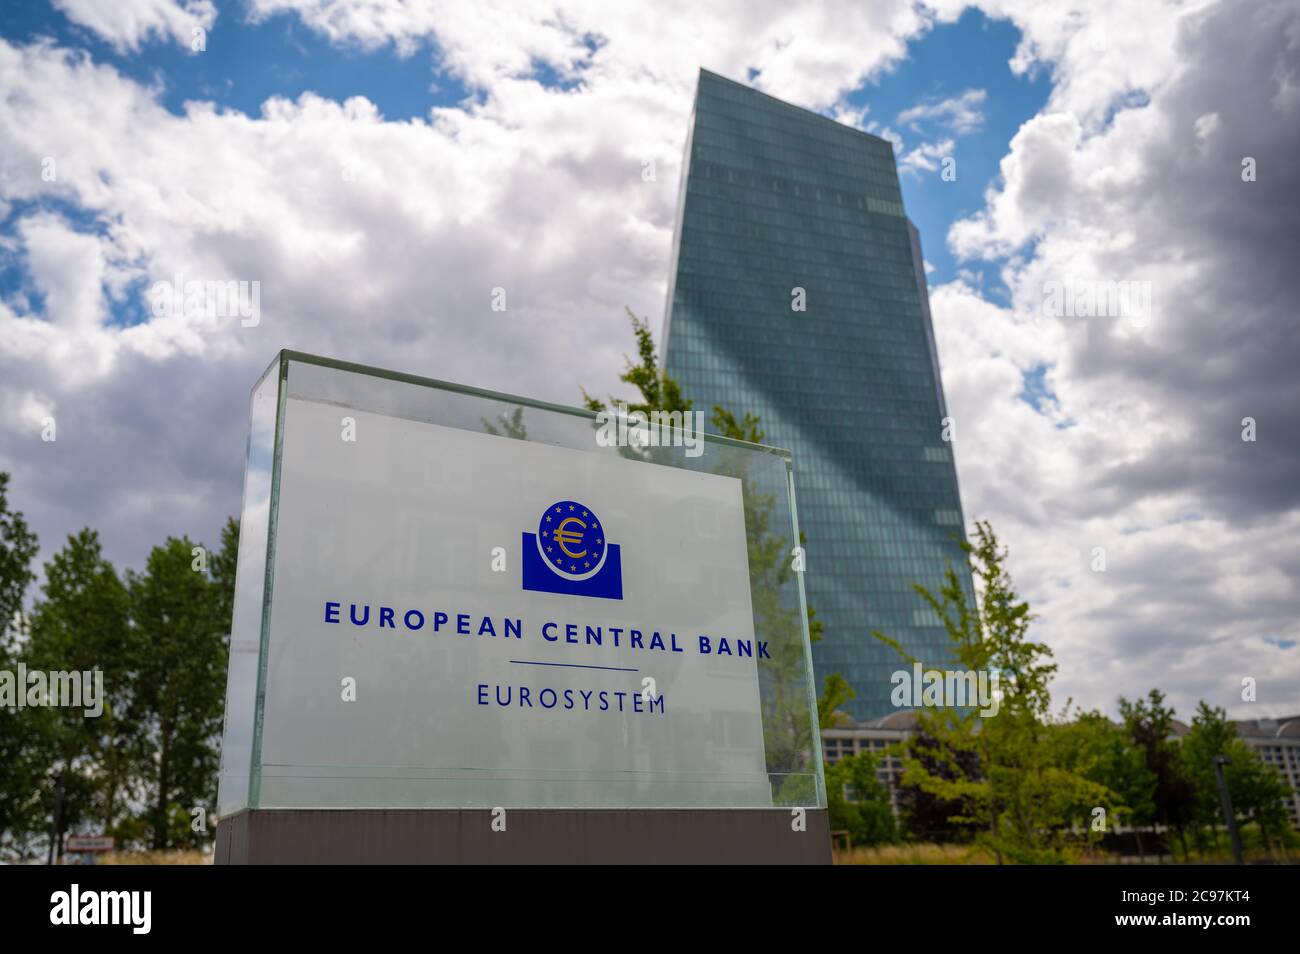 European Central Bank main building in Frankfurt, Germany on the banks of the River Main Stock Photo